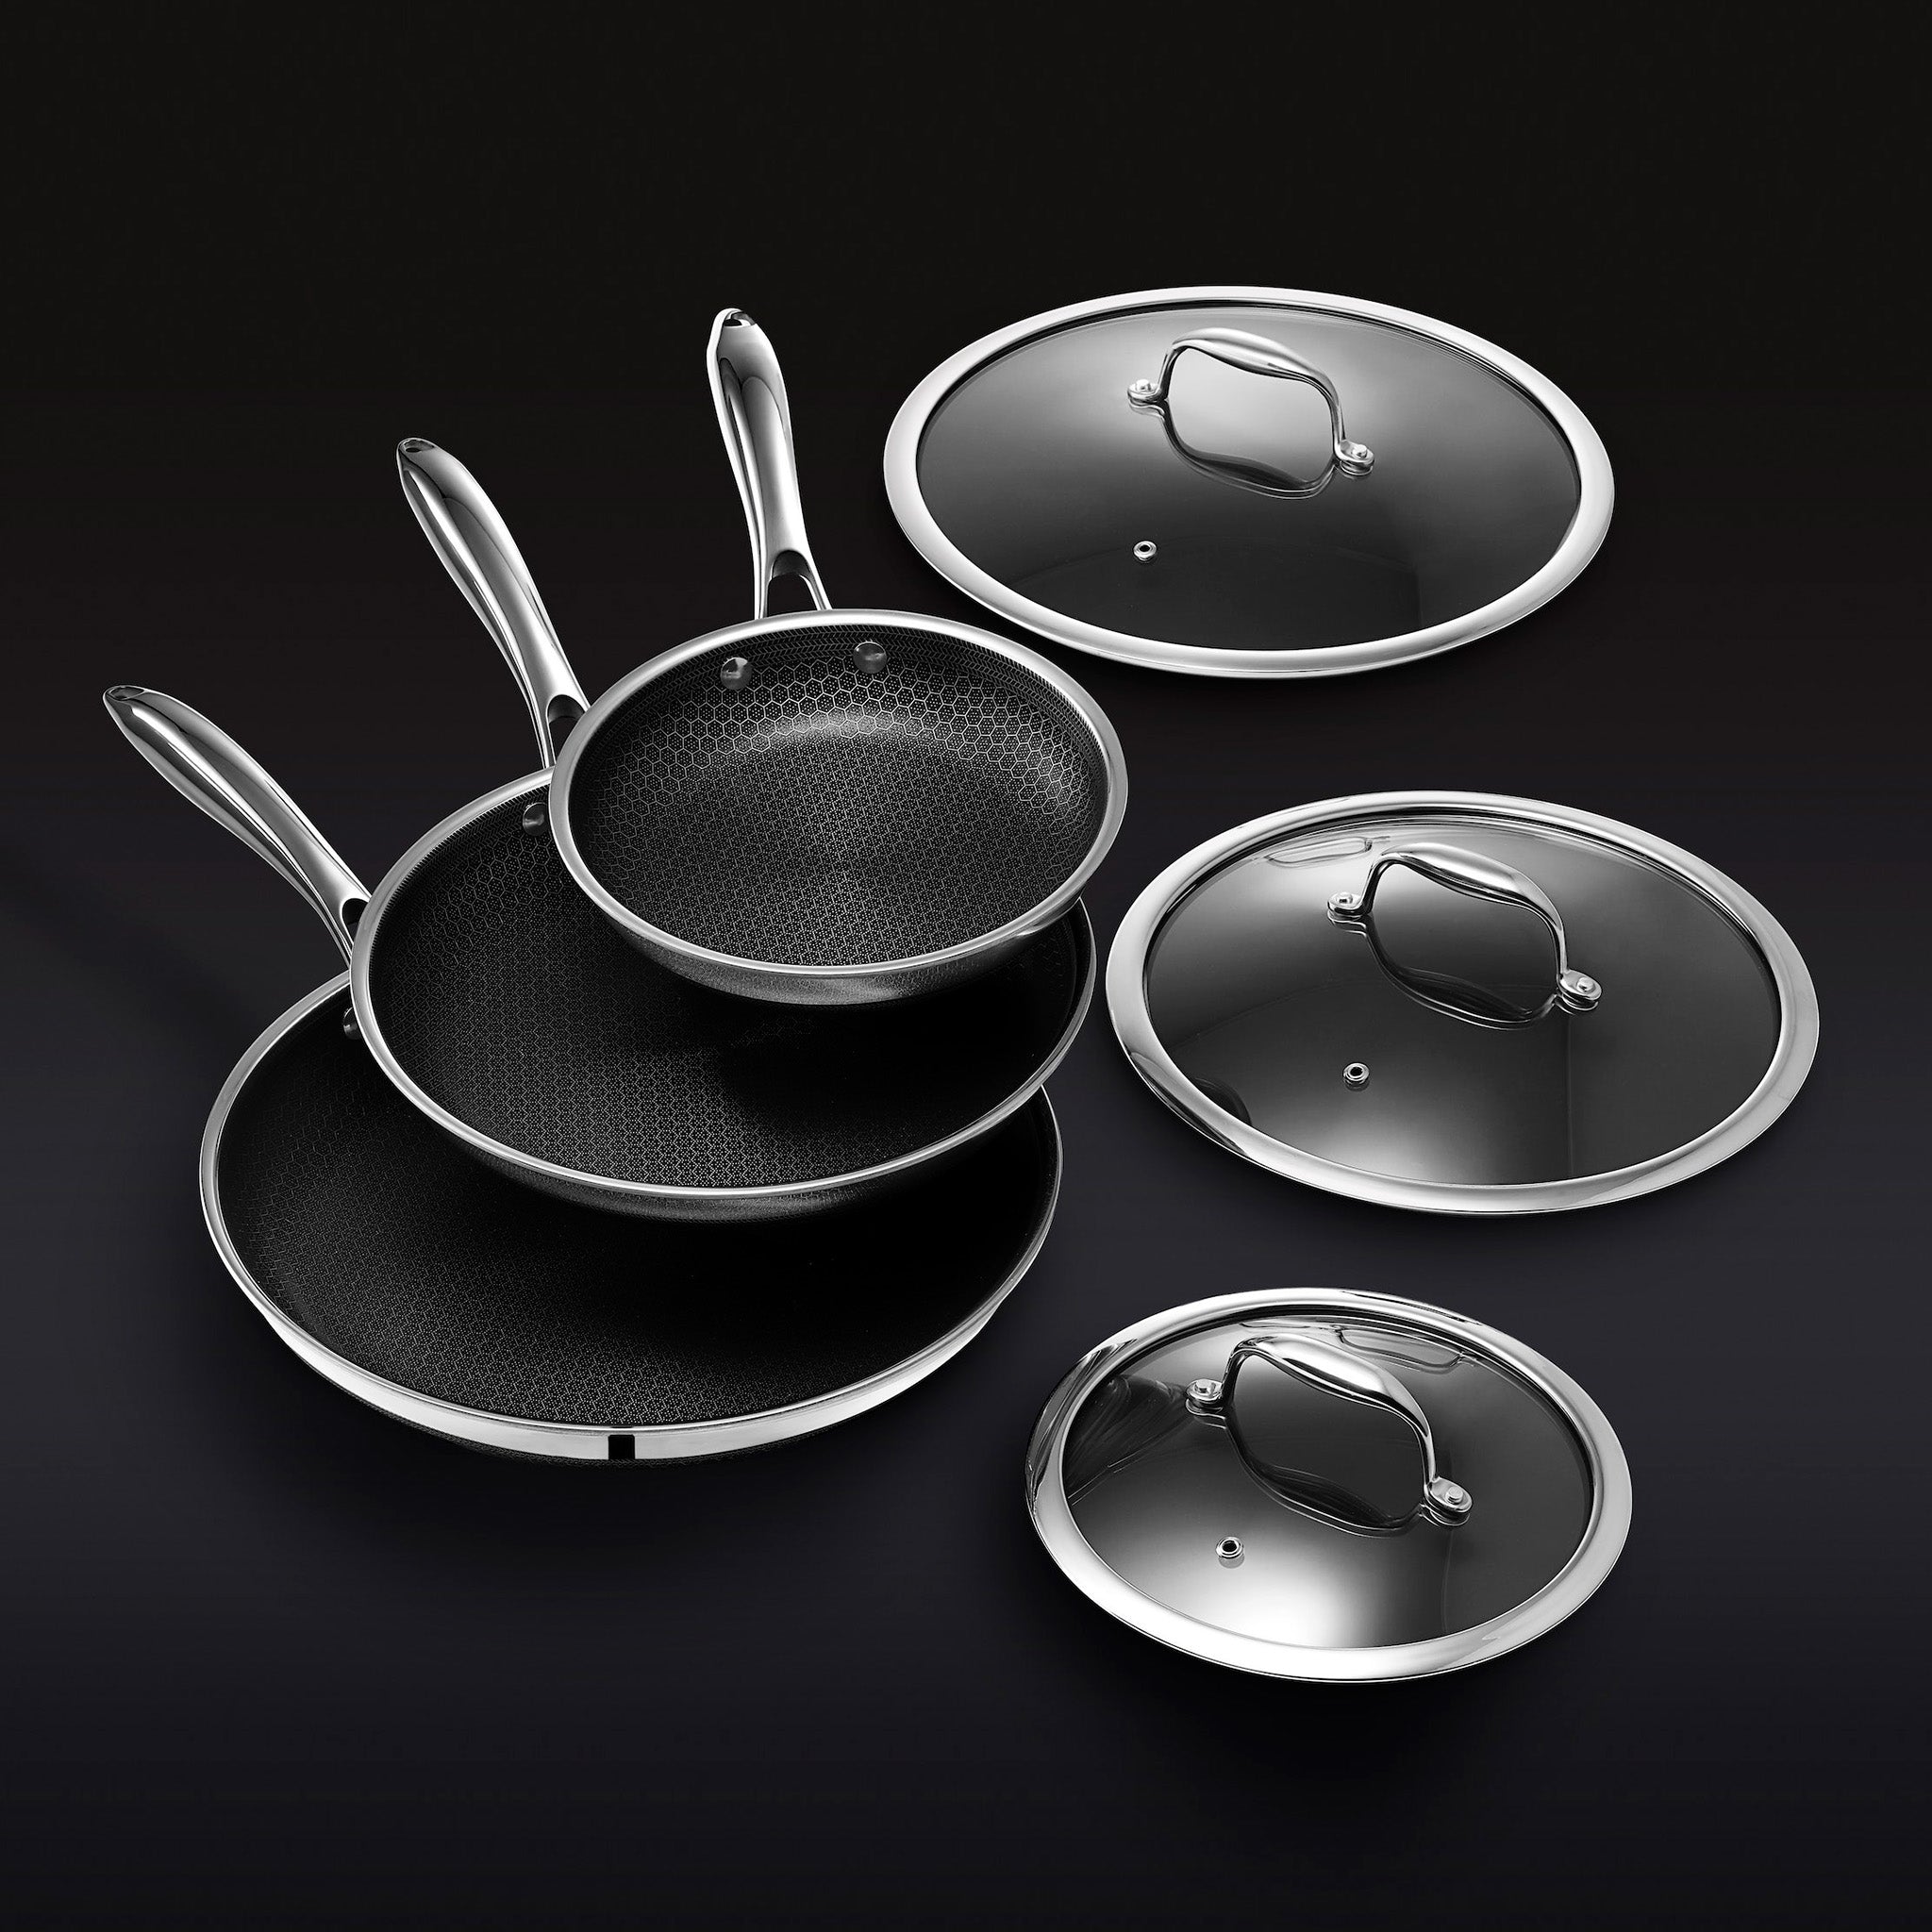 13pc HexClad Hybrid Cookware Set W/ Lids - Silver - 91 requests 13Count